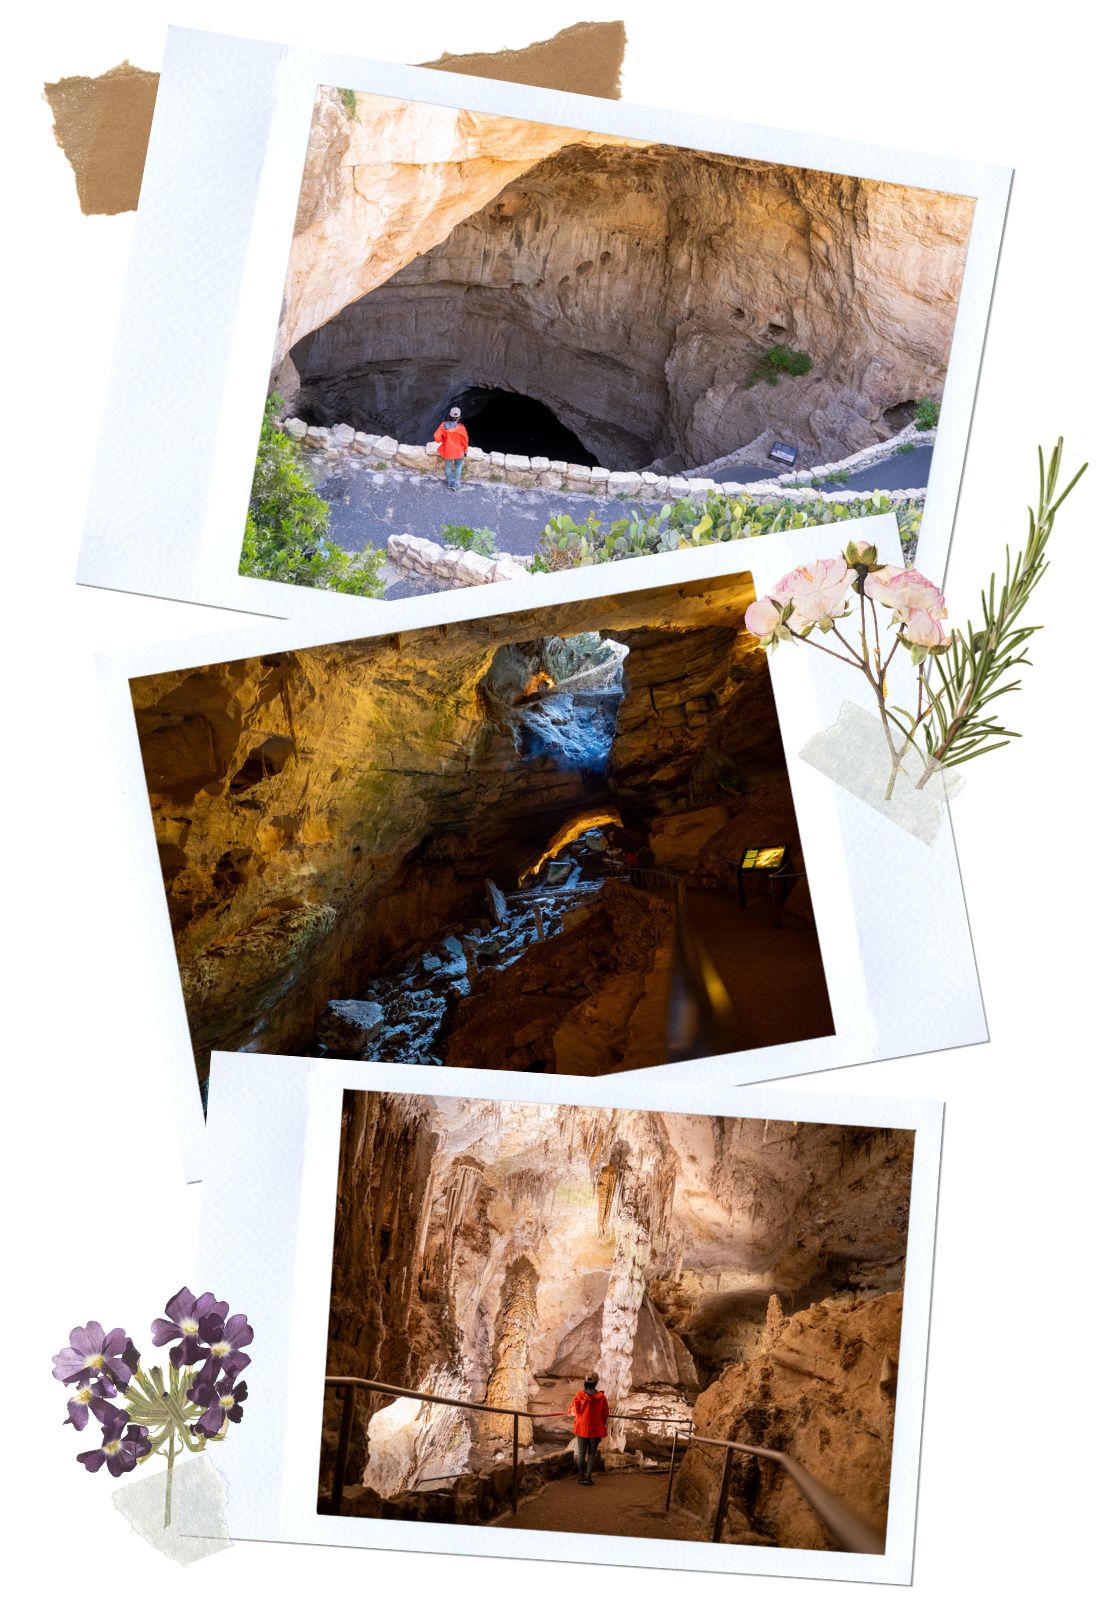 Carlsbad Caverns Big Room: Everything You Need to Know - Natural Entrance 1